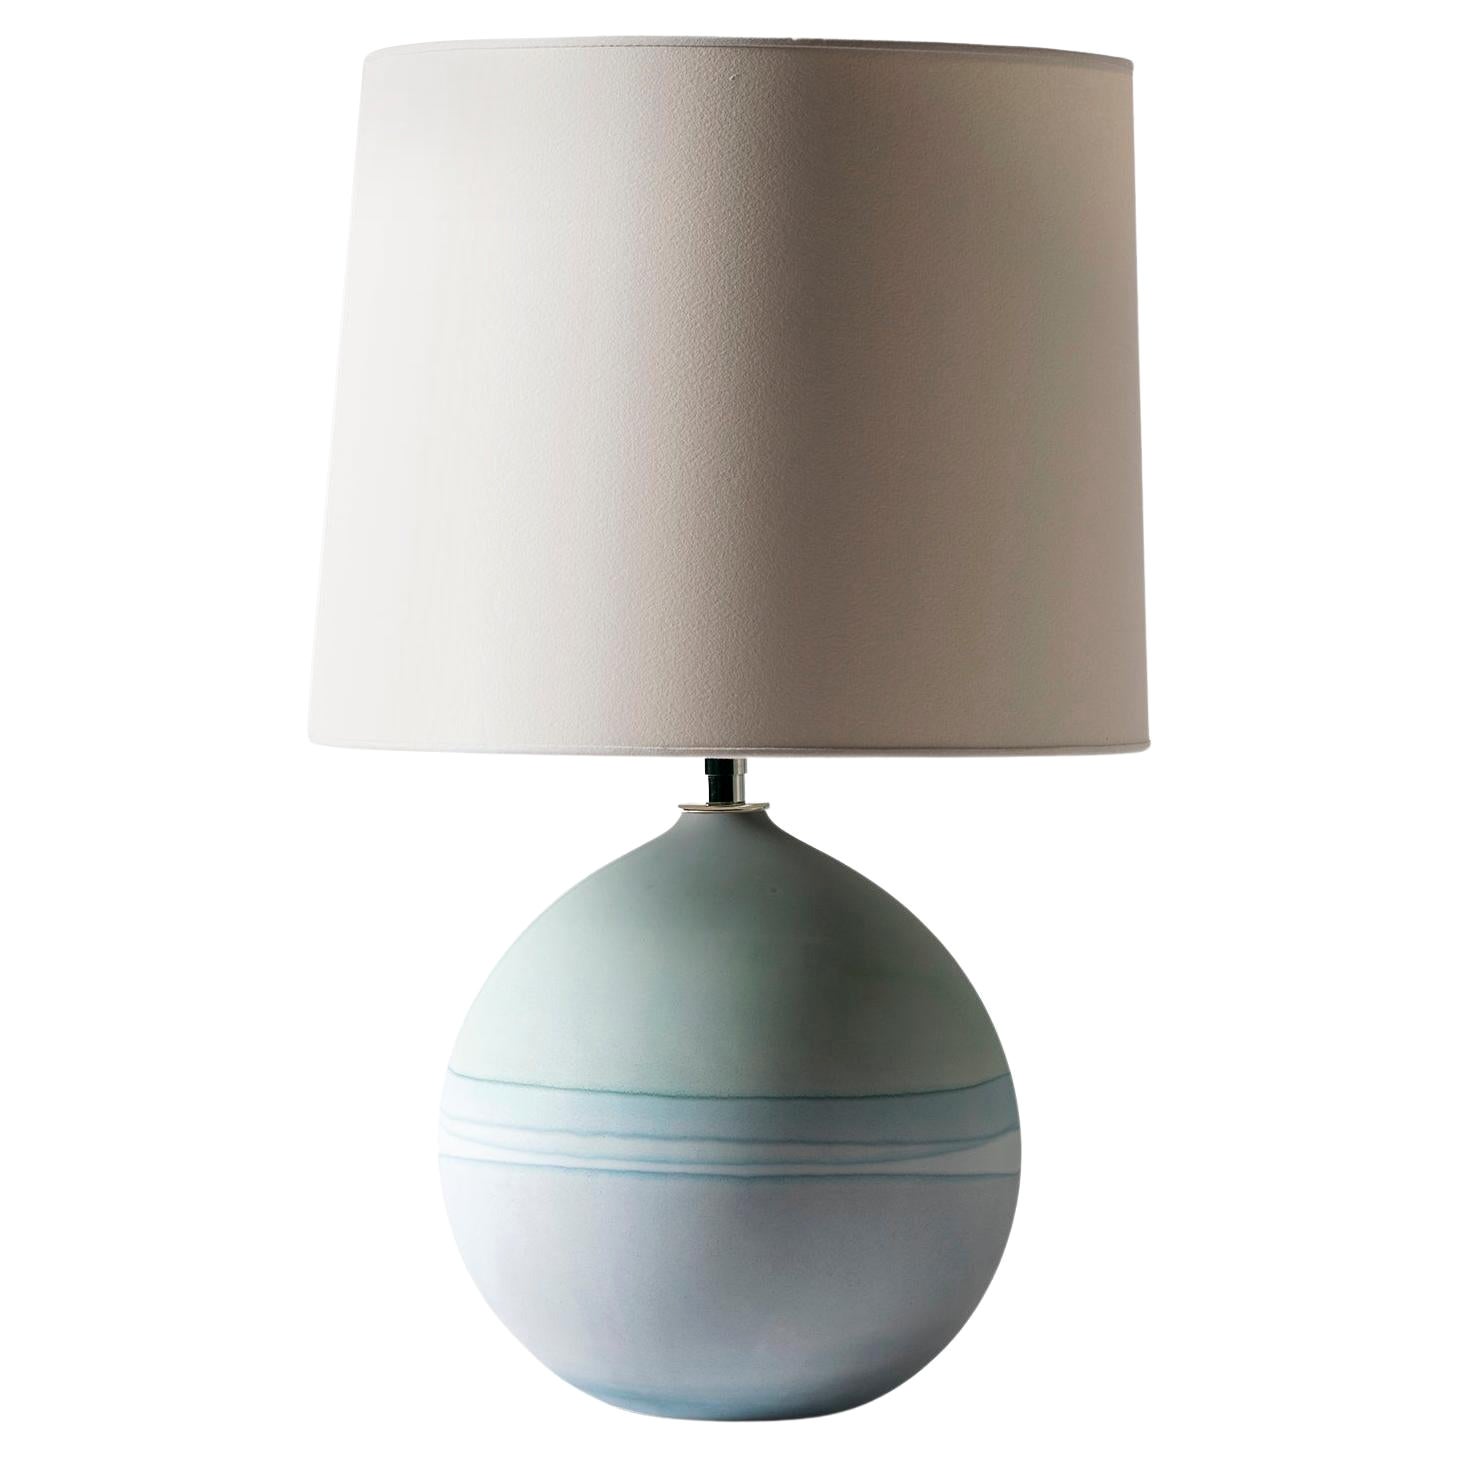 Saturn Lamp in Mint and Grey by Elyse Graham